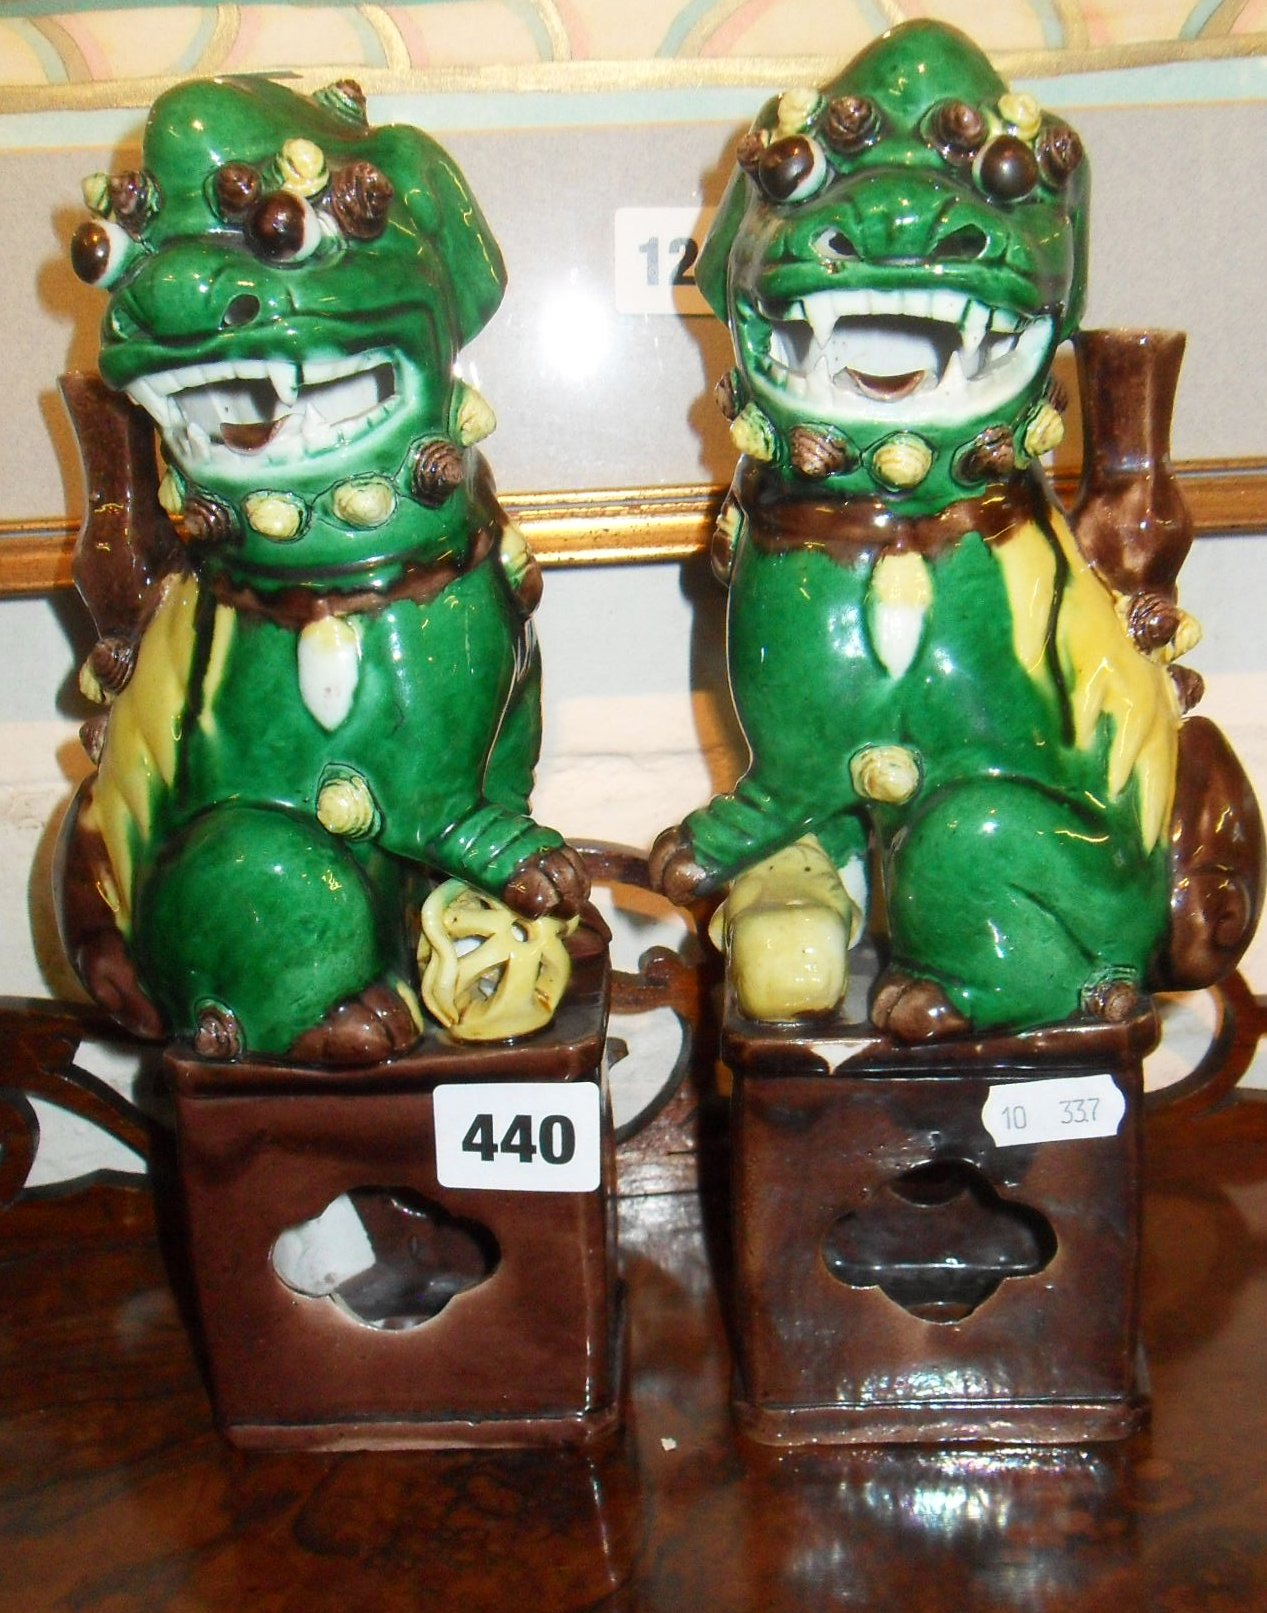 Two 20th c. Chinese "majolica" Foo dogs